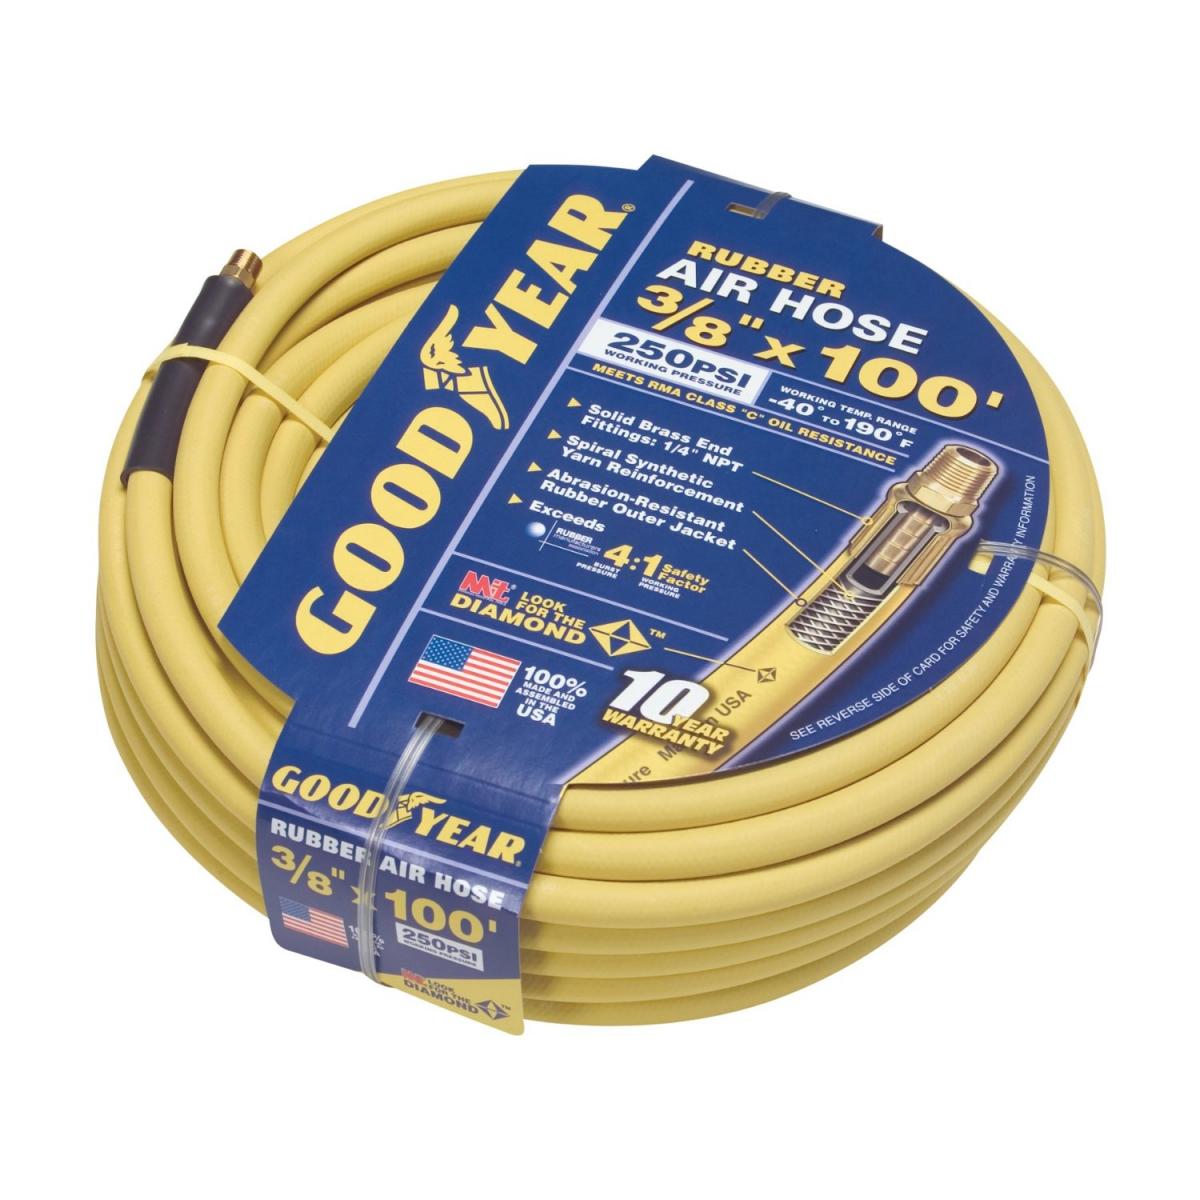 How to choose a Hose for Compressed Air